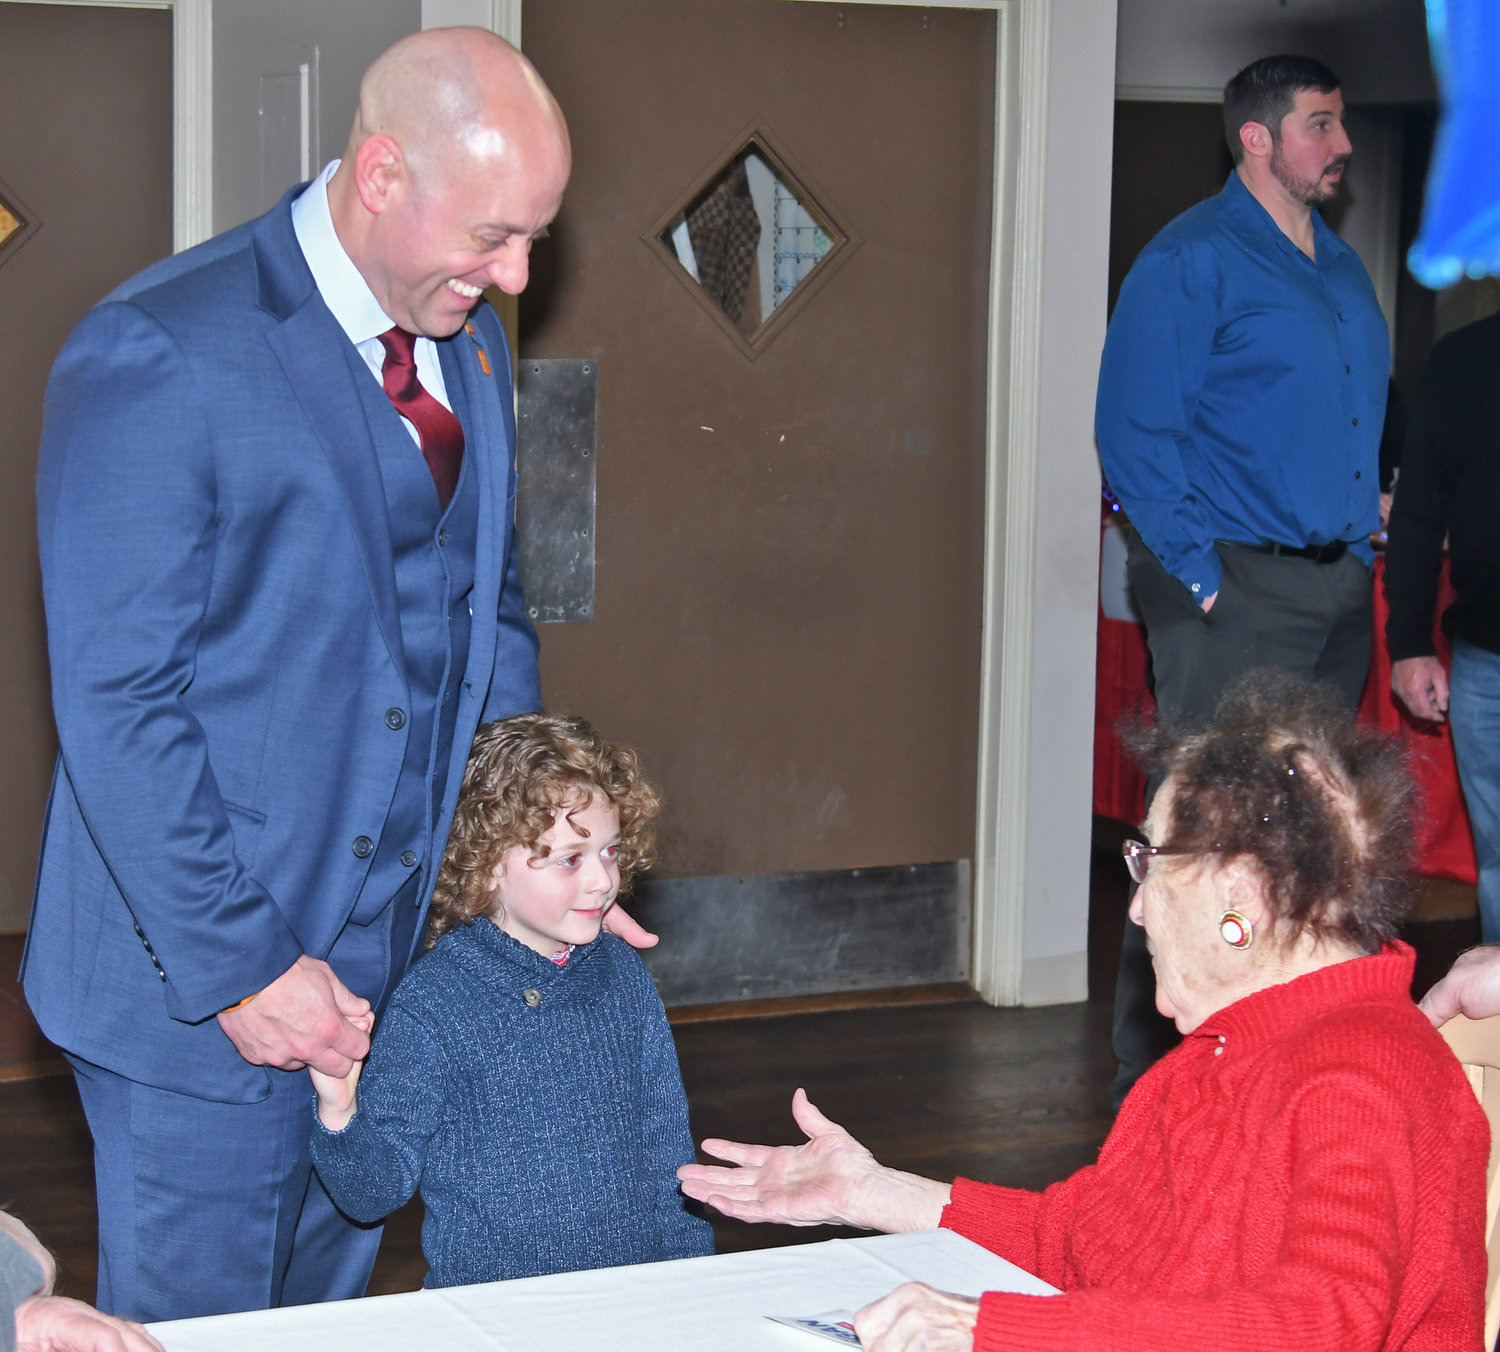 Rome mayoral candidate Jeffrey M. Lanigan and his son, Connor, age 5, greet supporter Pauline Cianfrocco at the Franklin Hotel on South James Street in Rome Tuesday evening.